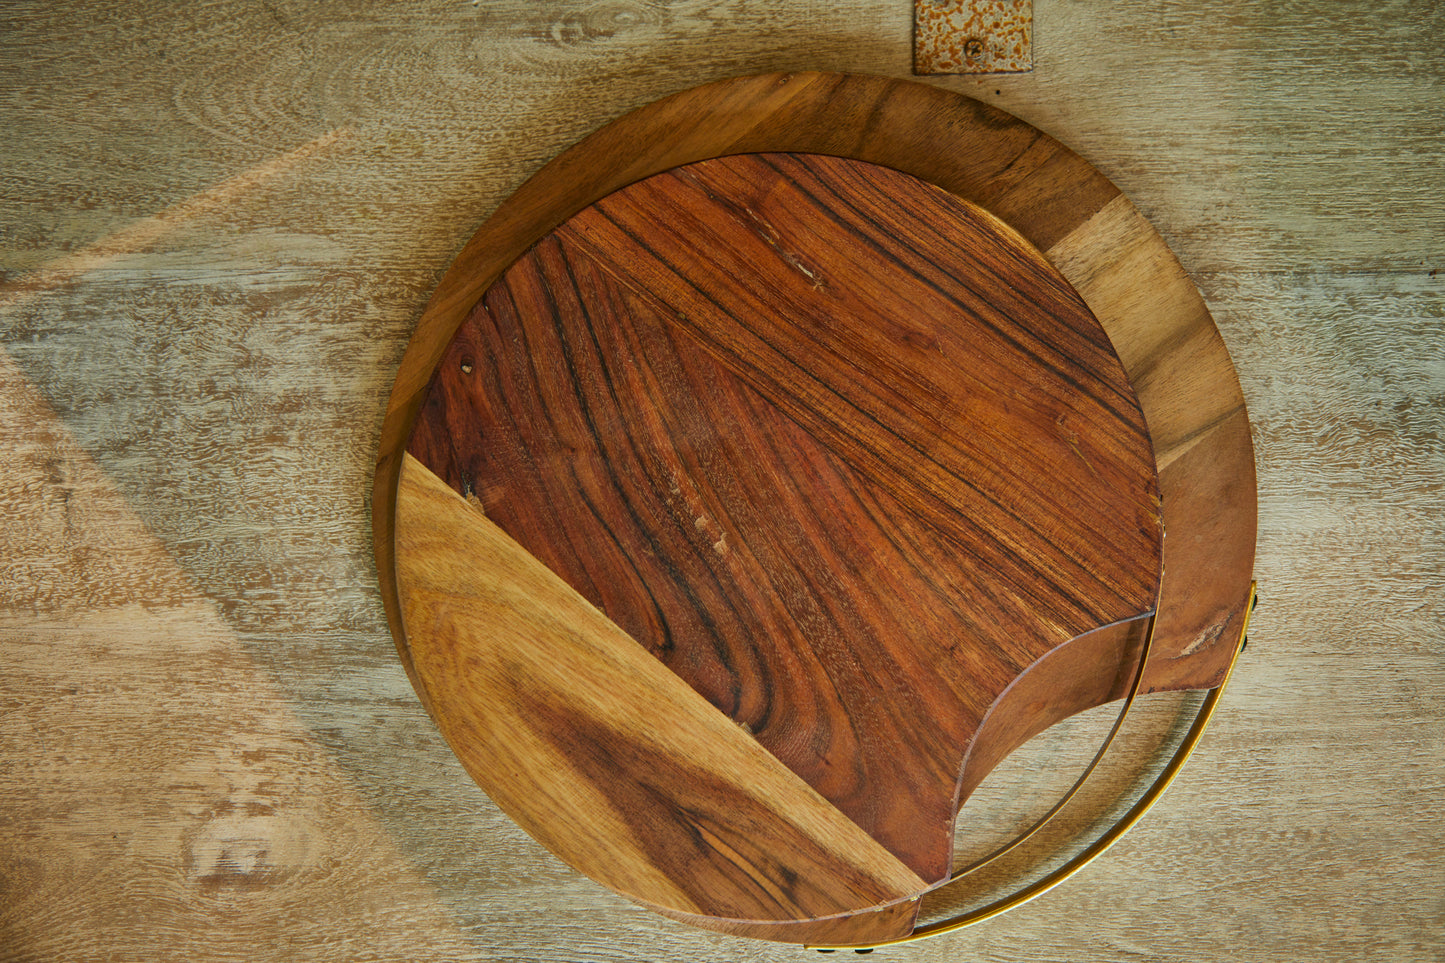 A Round Wooden Platter With A Metal Handle On One Side.